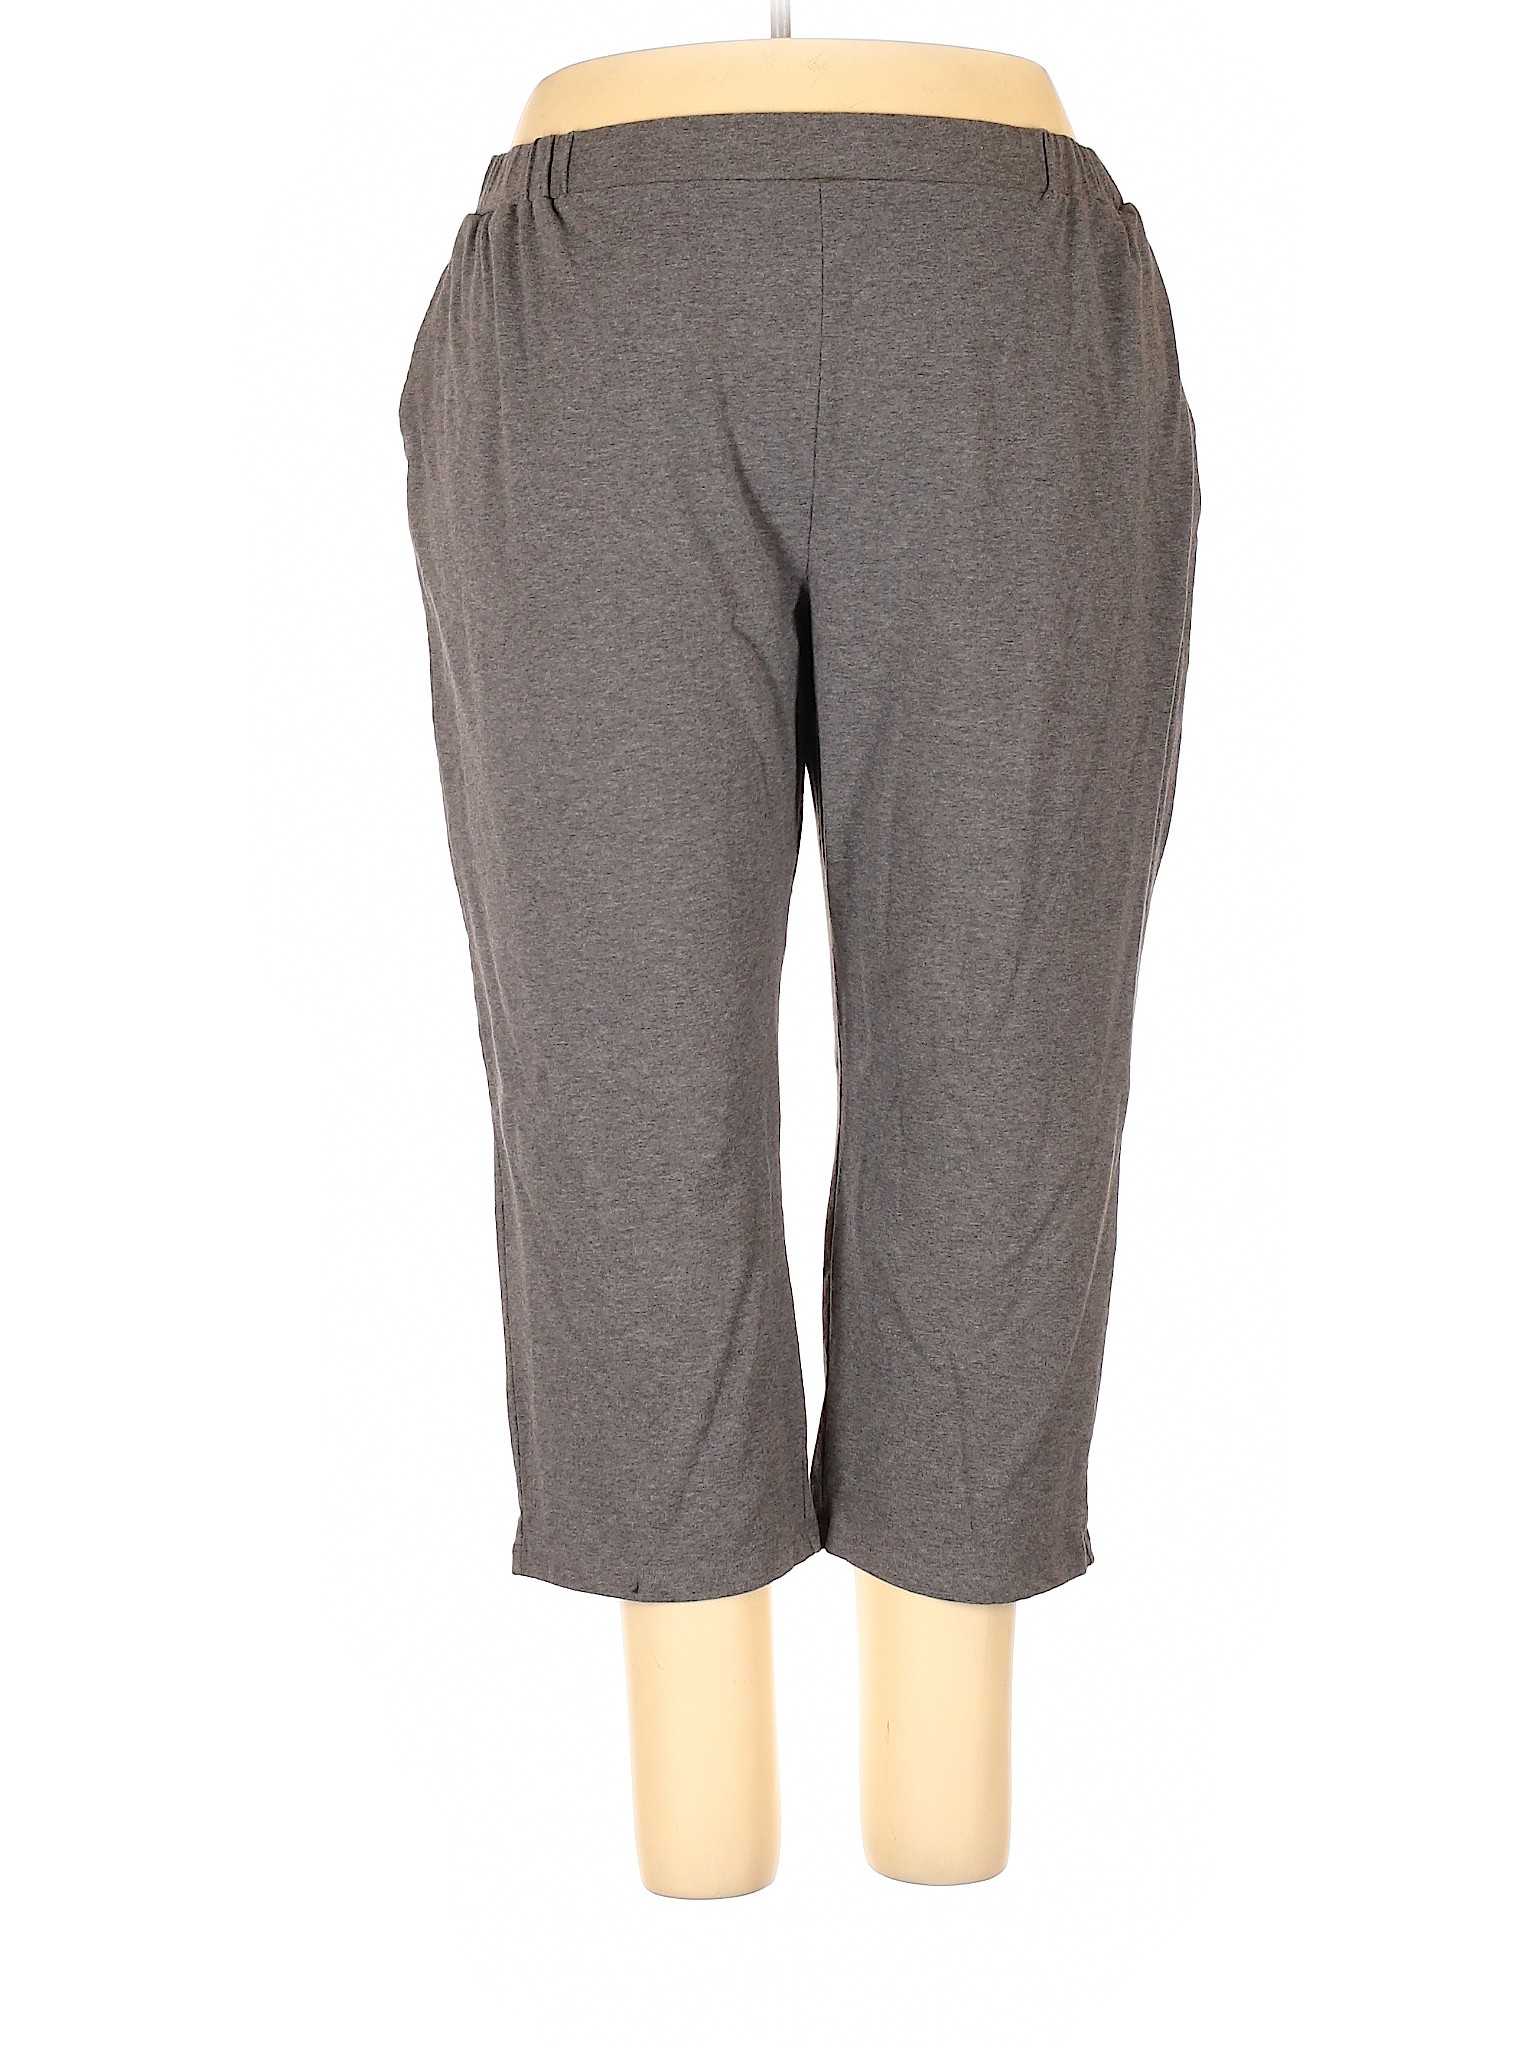 Terra & Sky Solid Gray Casual Pants Size 20 - 22 (Plus) - 66% off | thredUP